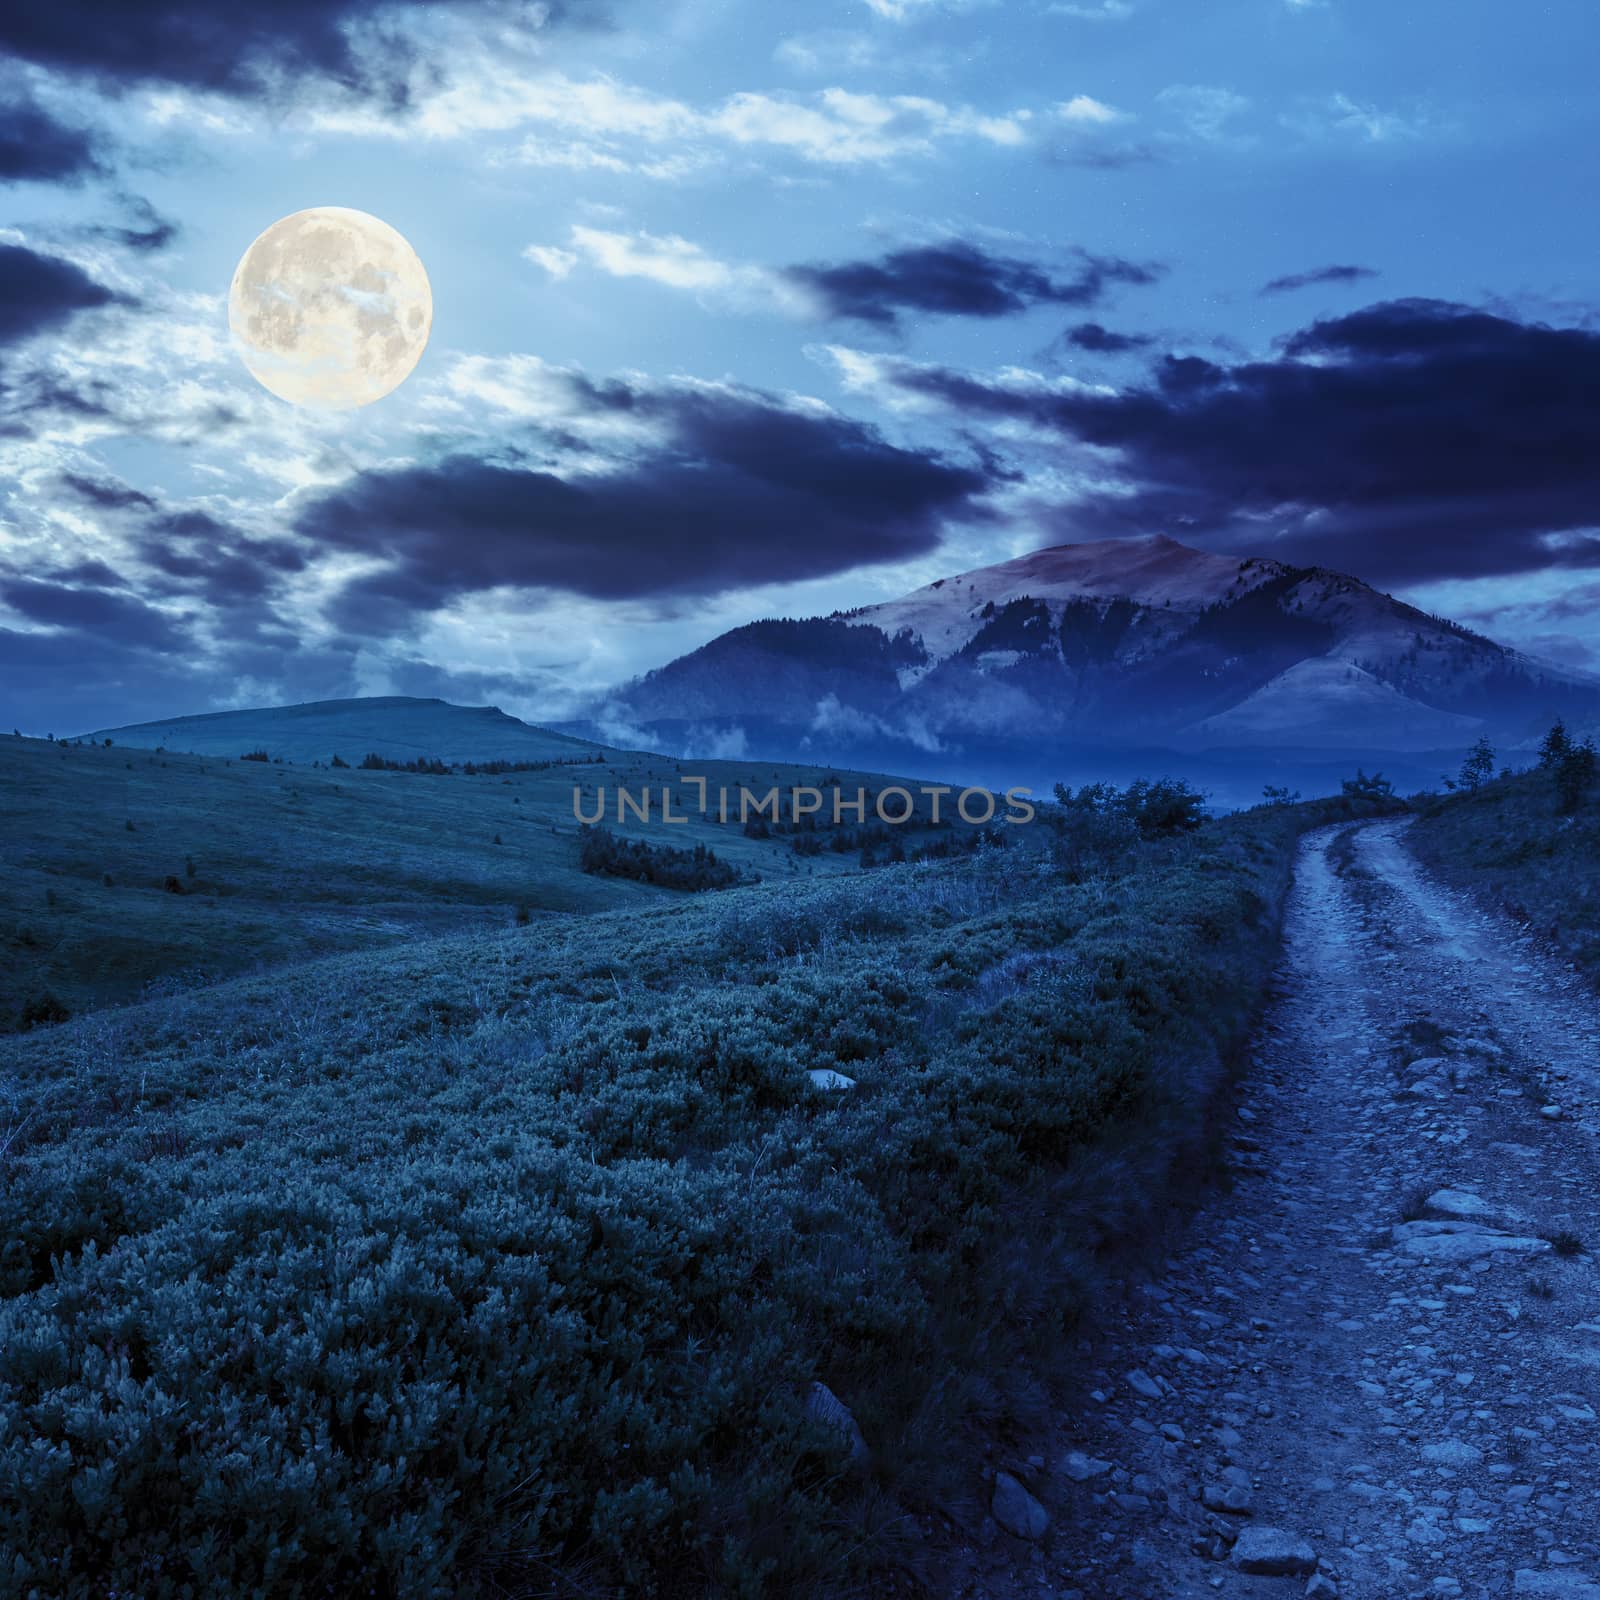 gravel road going off into the distance and passes through the green field in mountains at night in full moon light